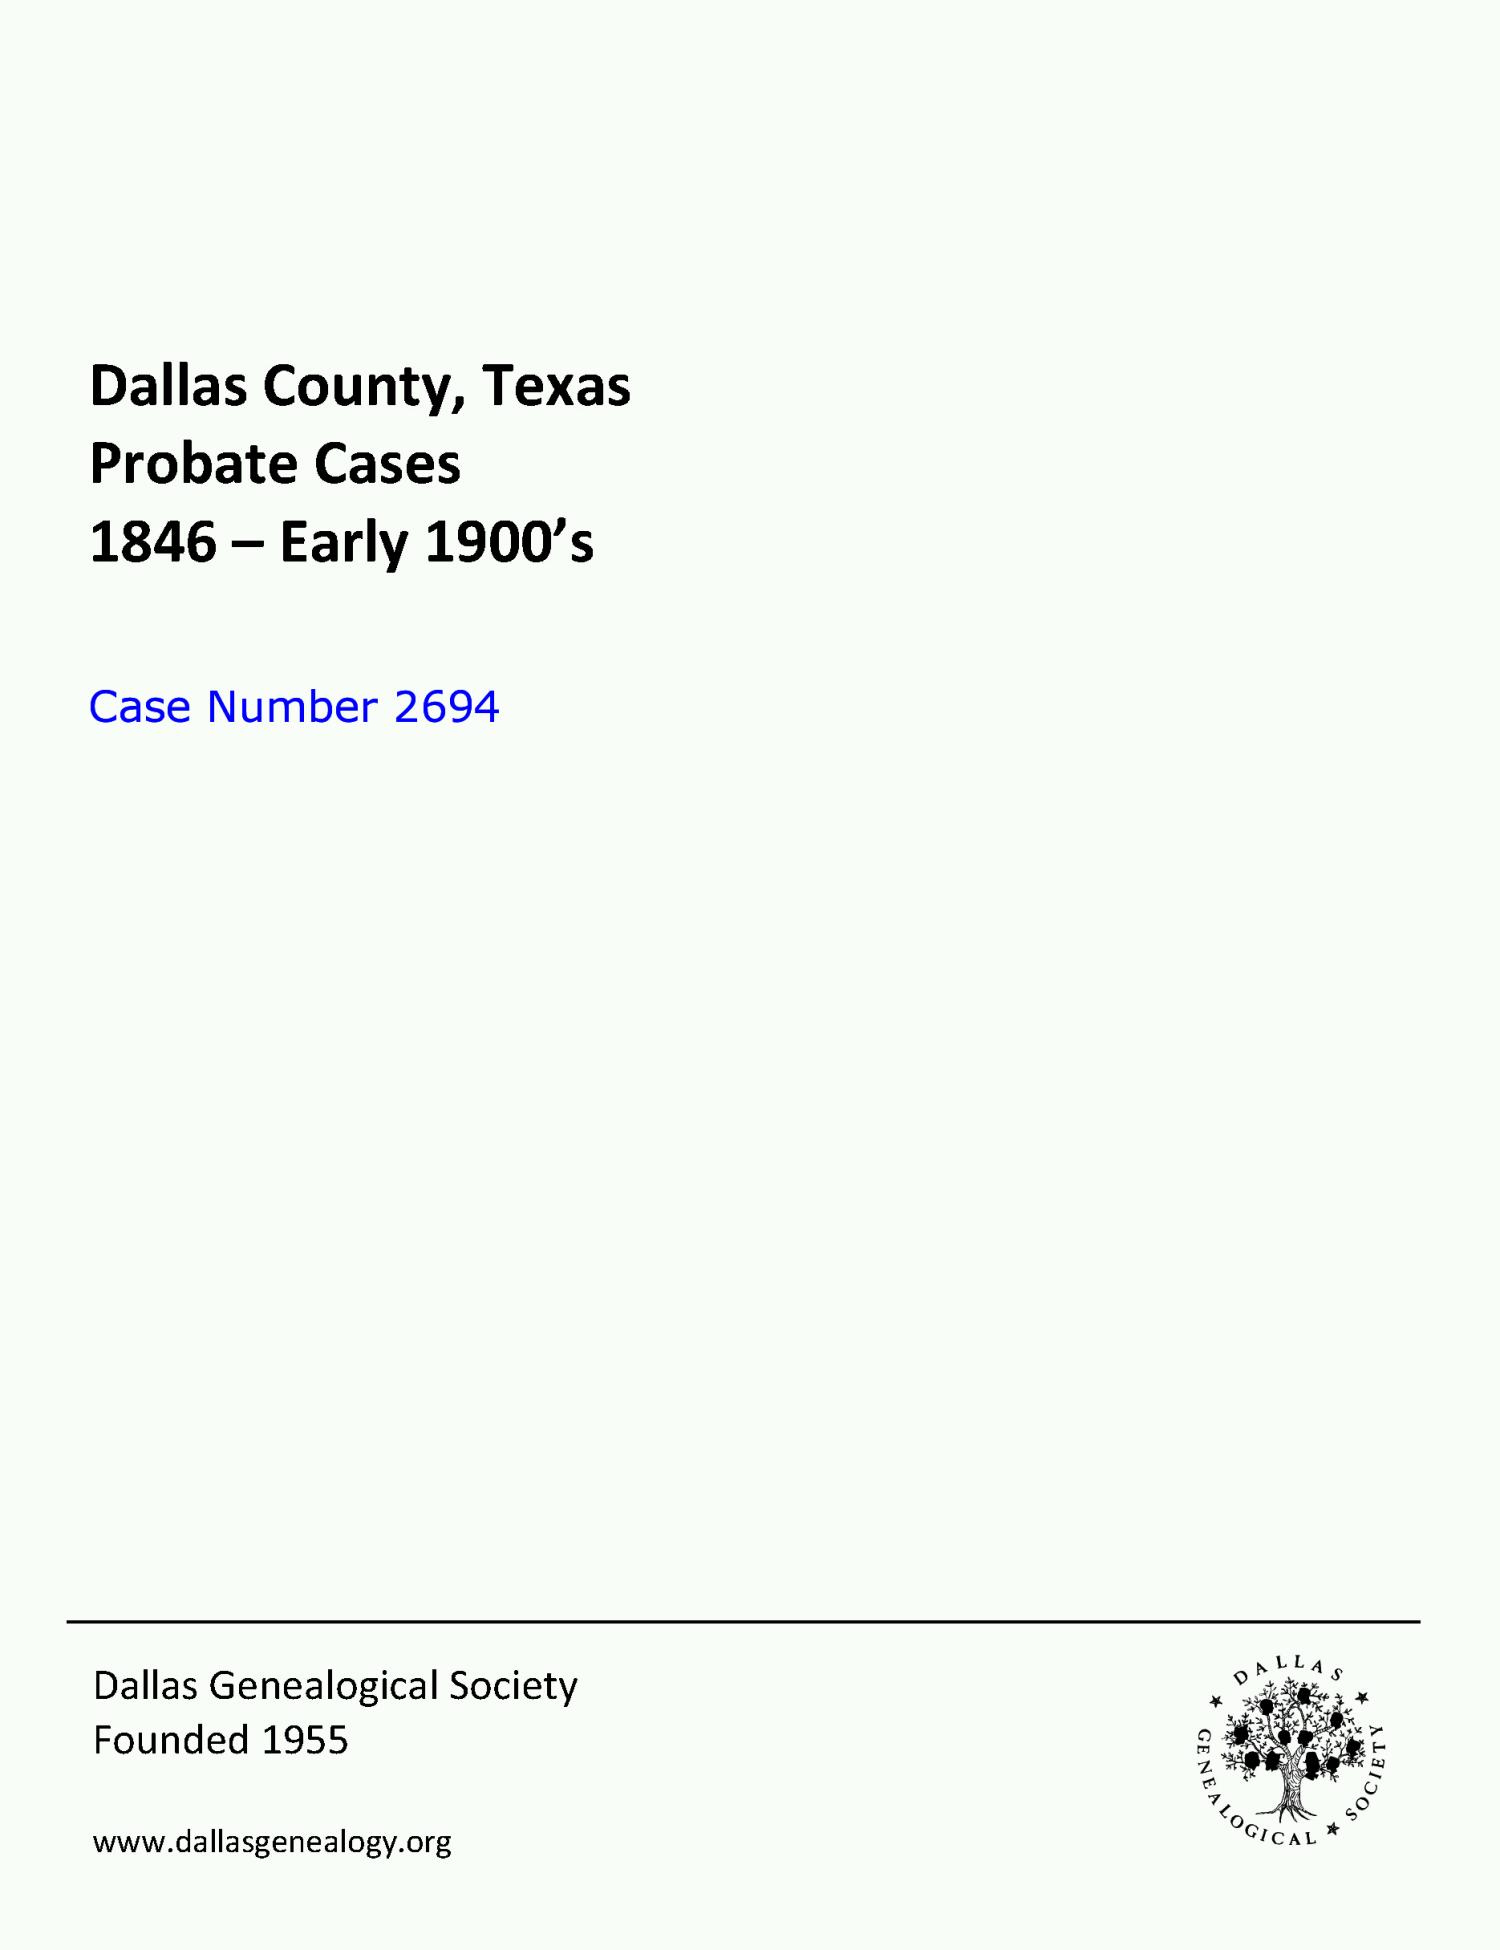 Dallas County Probate Case 2694: Firth, Sarah (Deceased)
                                                
                                                    [Sequence #]: 1 of 26
                                                